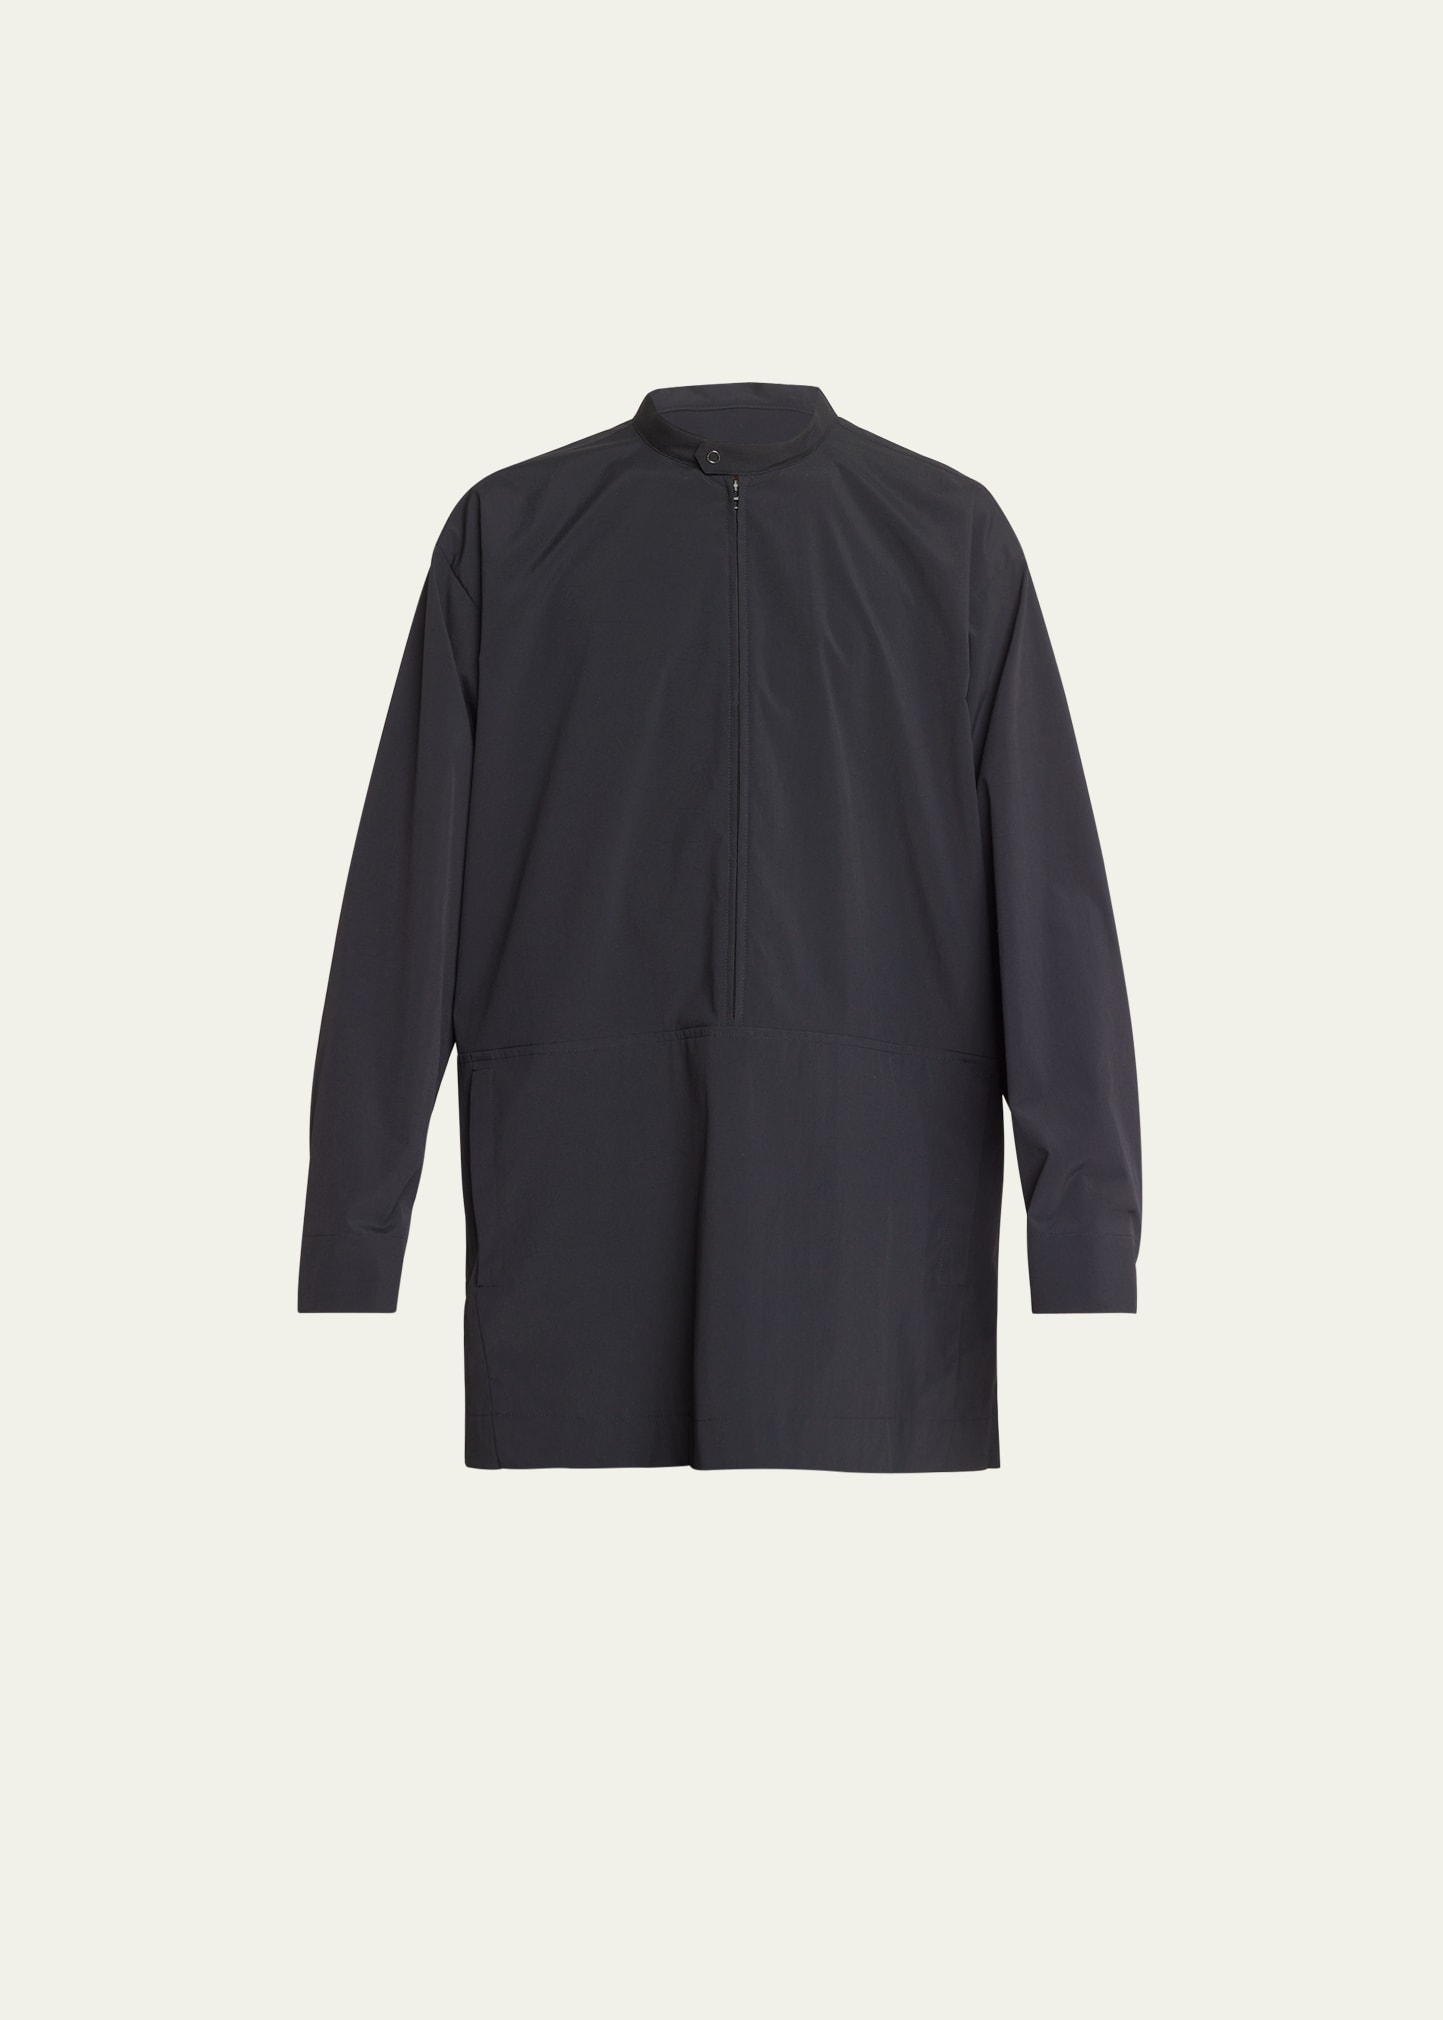 Issey Miyake Men's Packable Half-zip Shirt With Band Collar In Black